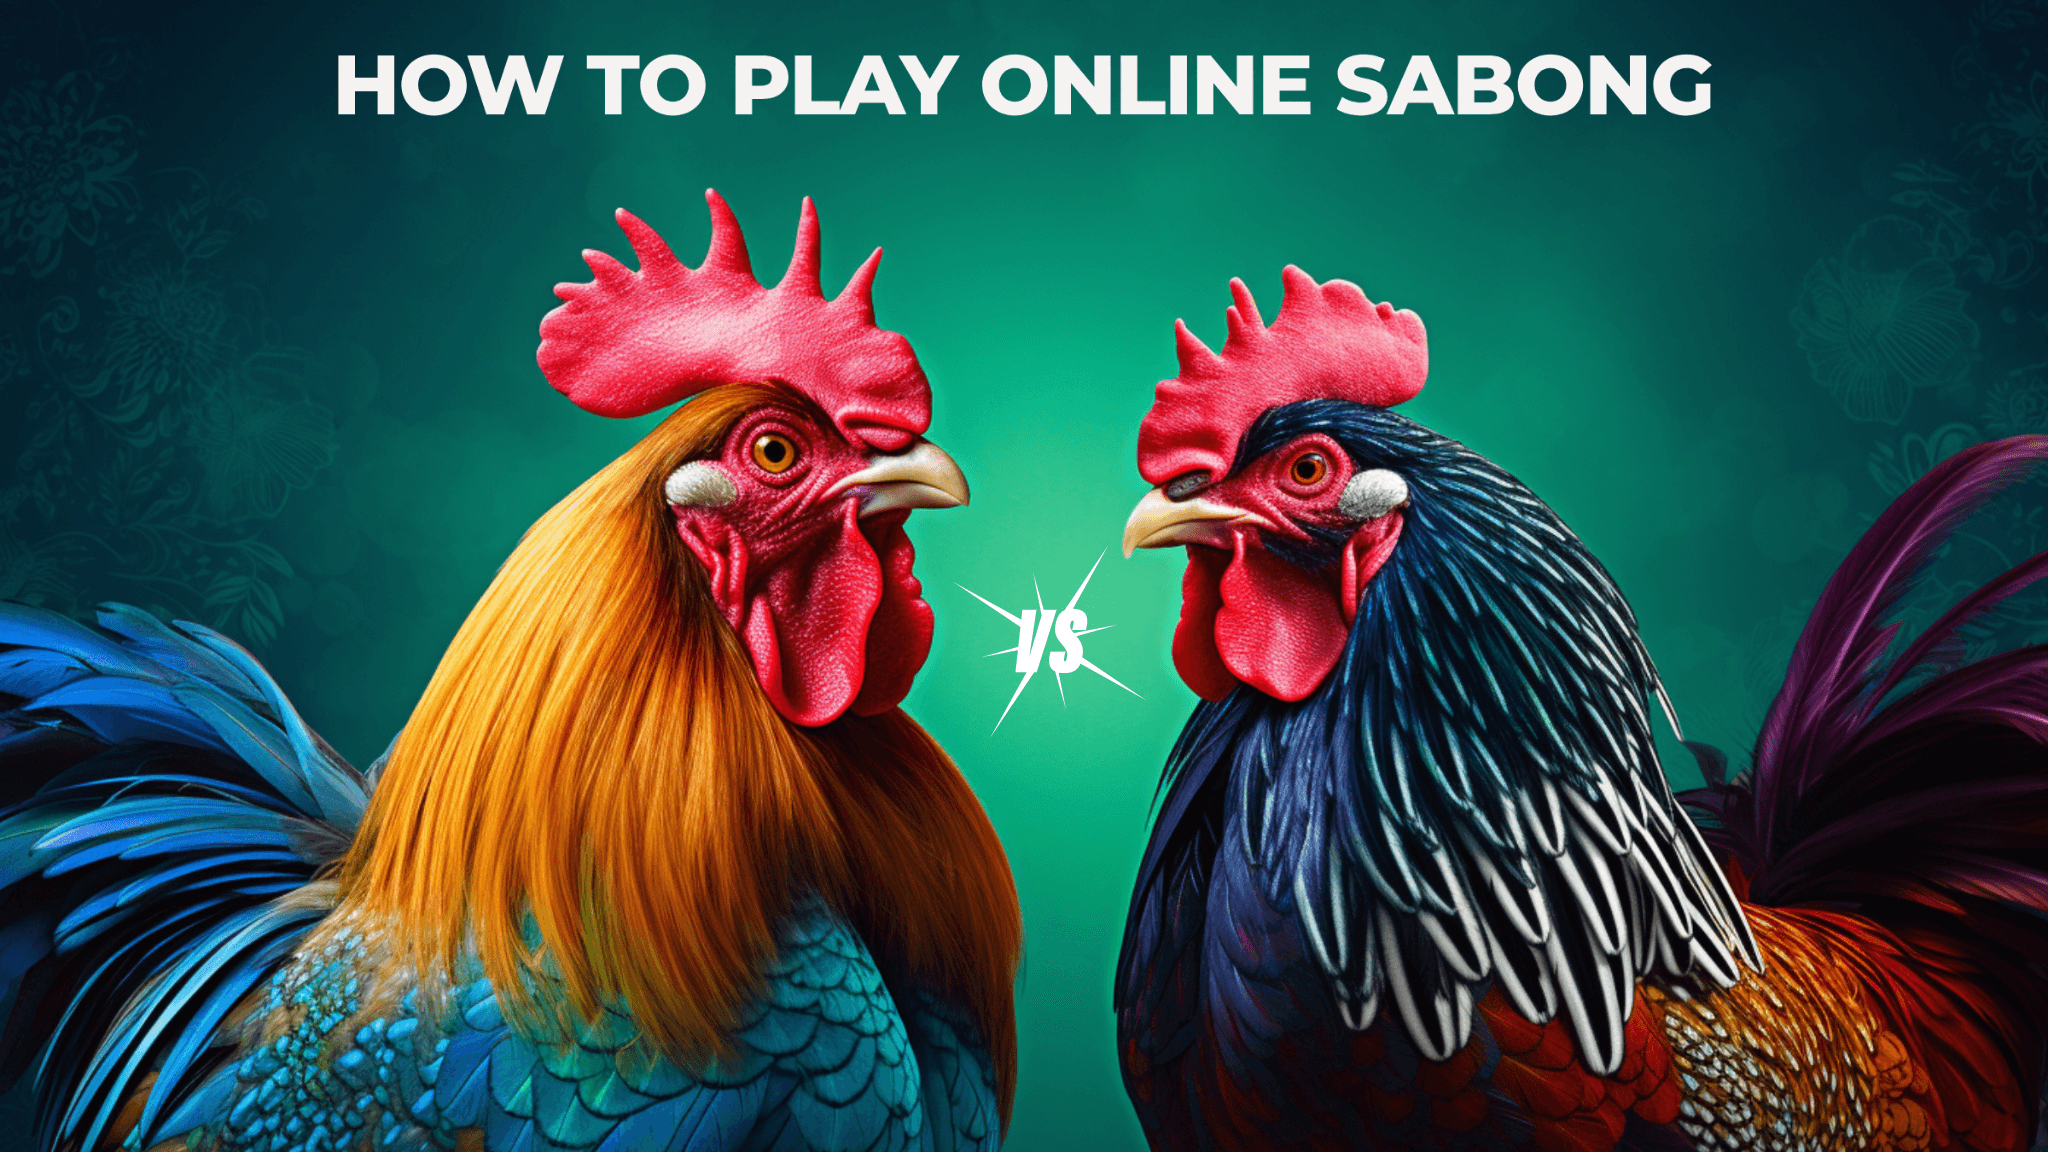 How to Play Online Sabong: Guide